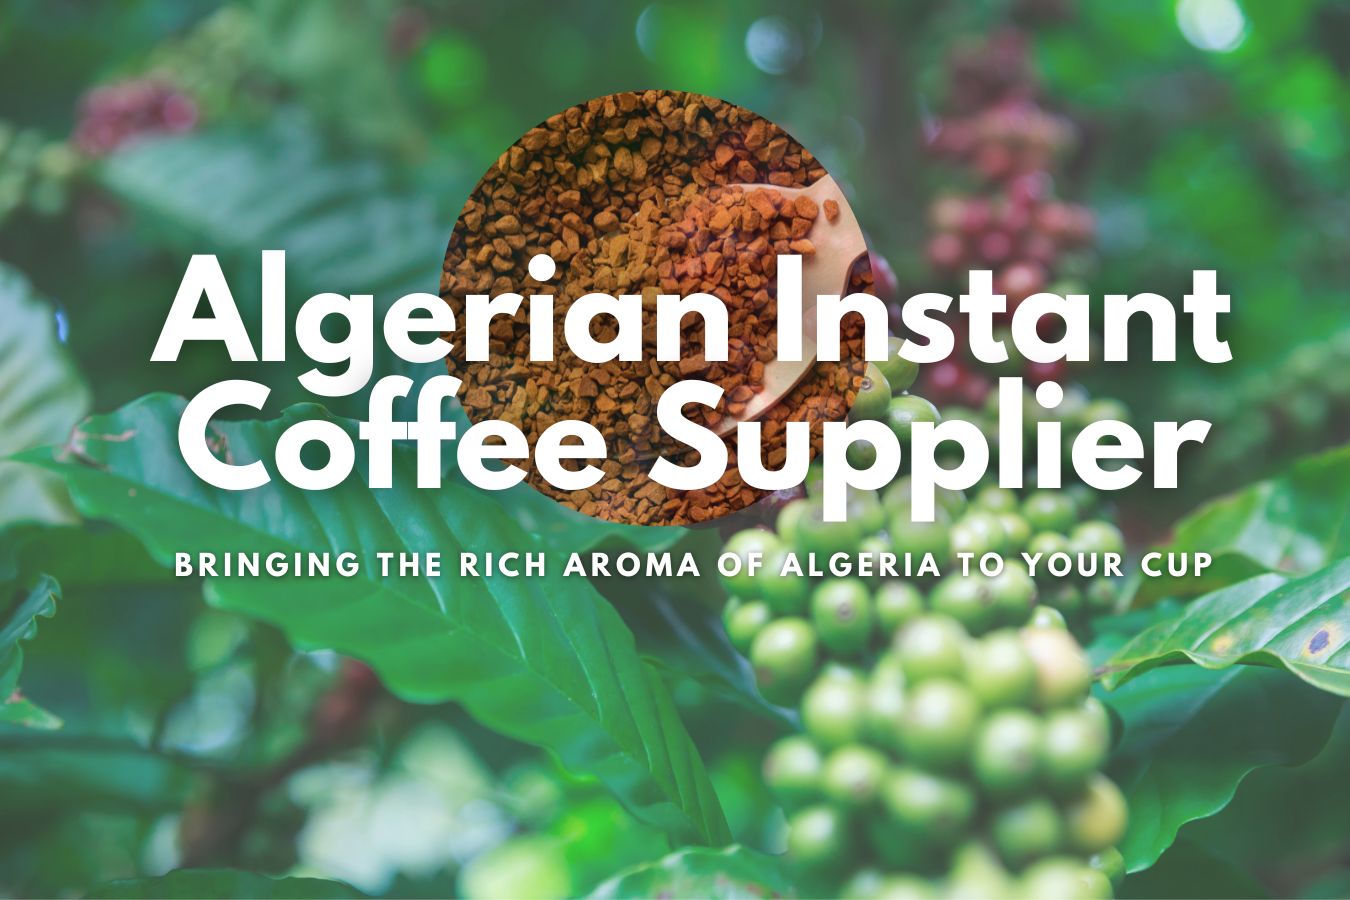 Algerian Instant Coffee Supplier: Bringing the Rich Aroma of Algeria to Your Cup